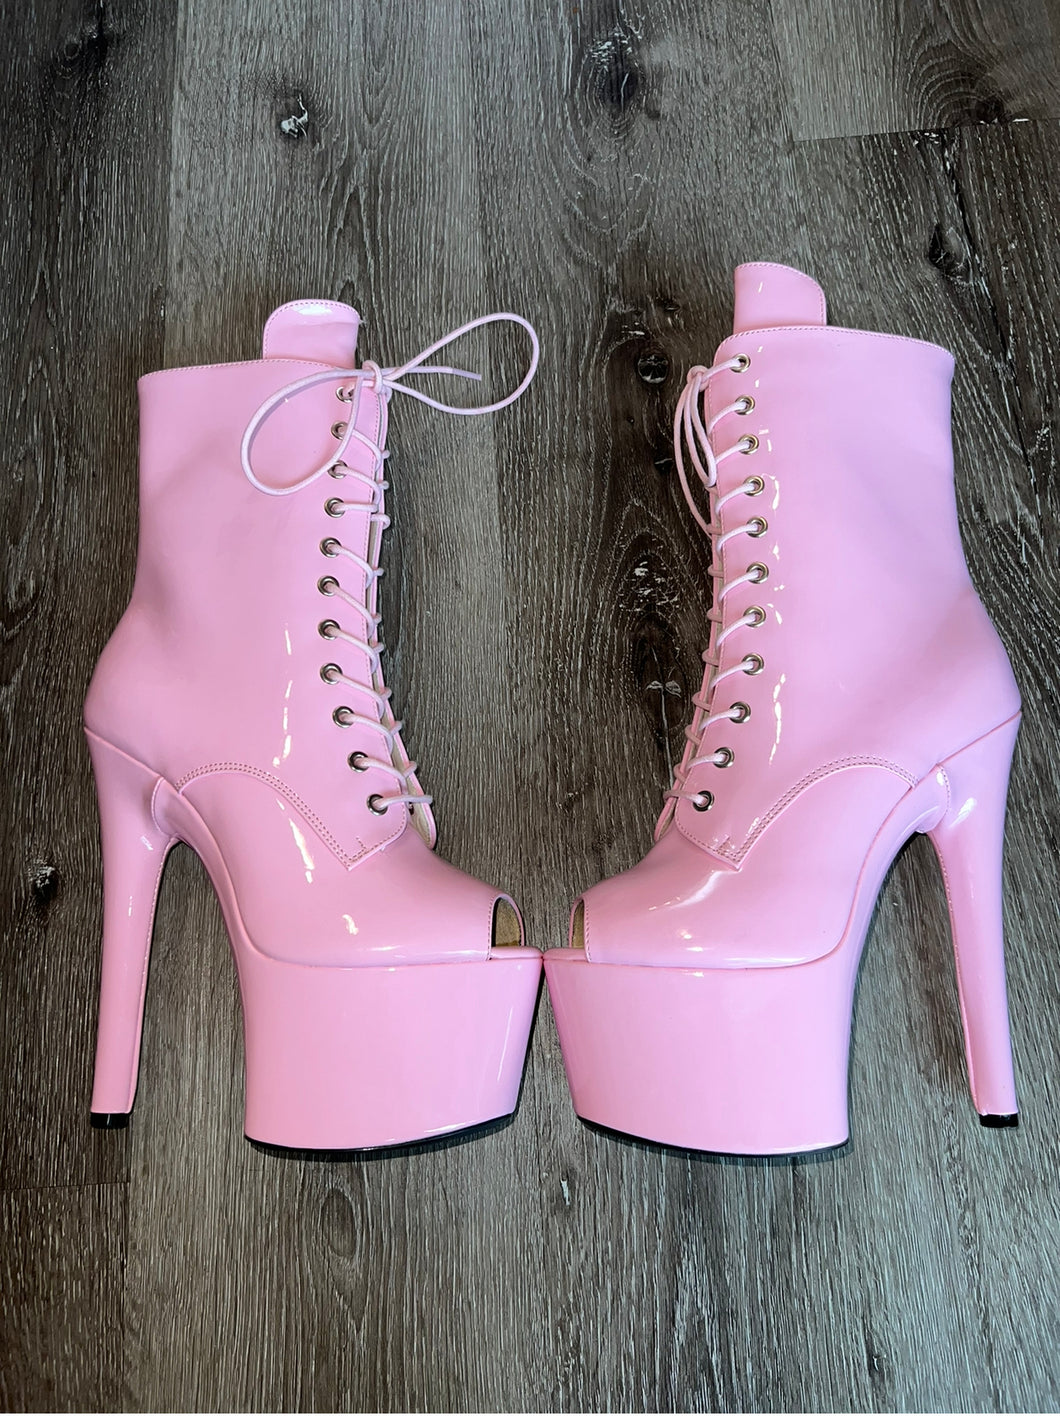 PINK FAUX LEATHER ANKLE BOOTS WITH SHINY FINISH